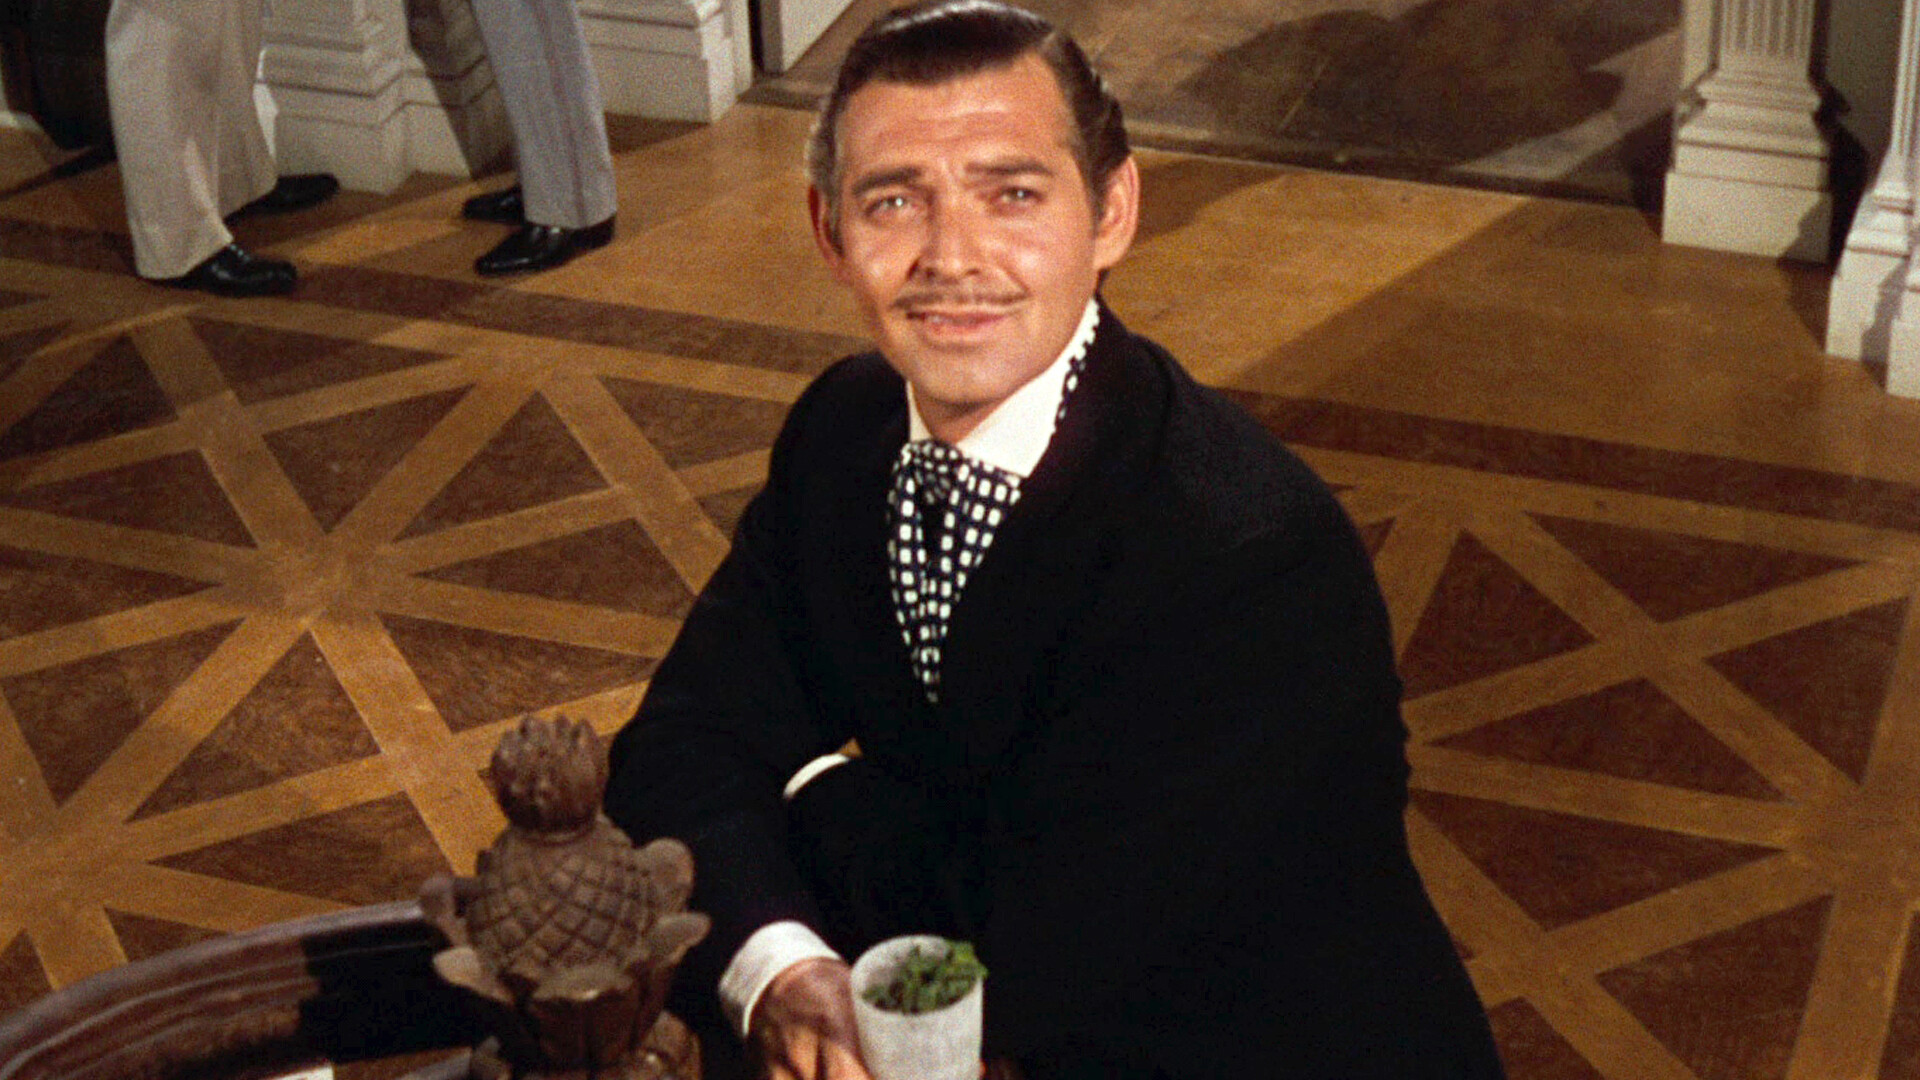 Gone with the Wind: Clark Gable as Rhett Butler, a cynical, charming, and mocking philanderer. 1920x1080 Full HD Wallpaper.